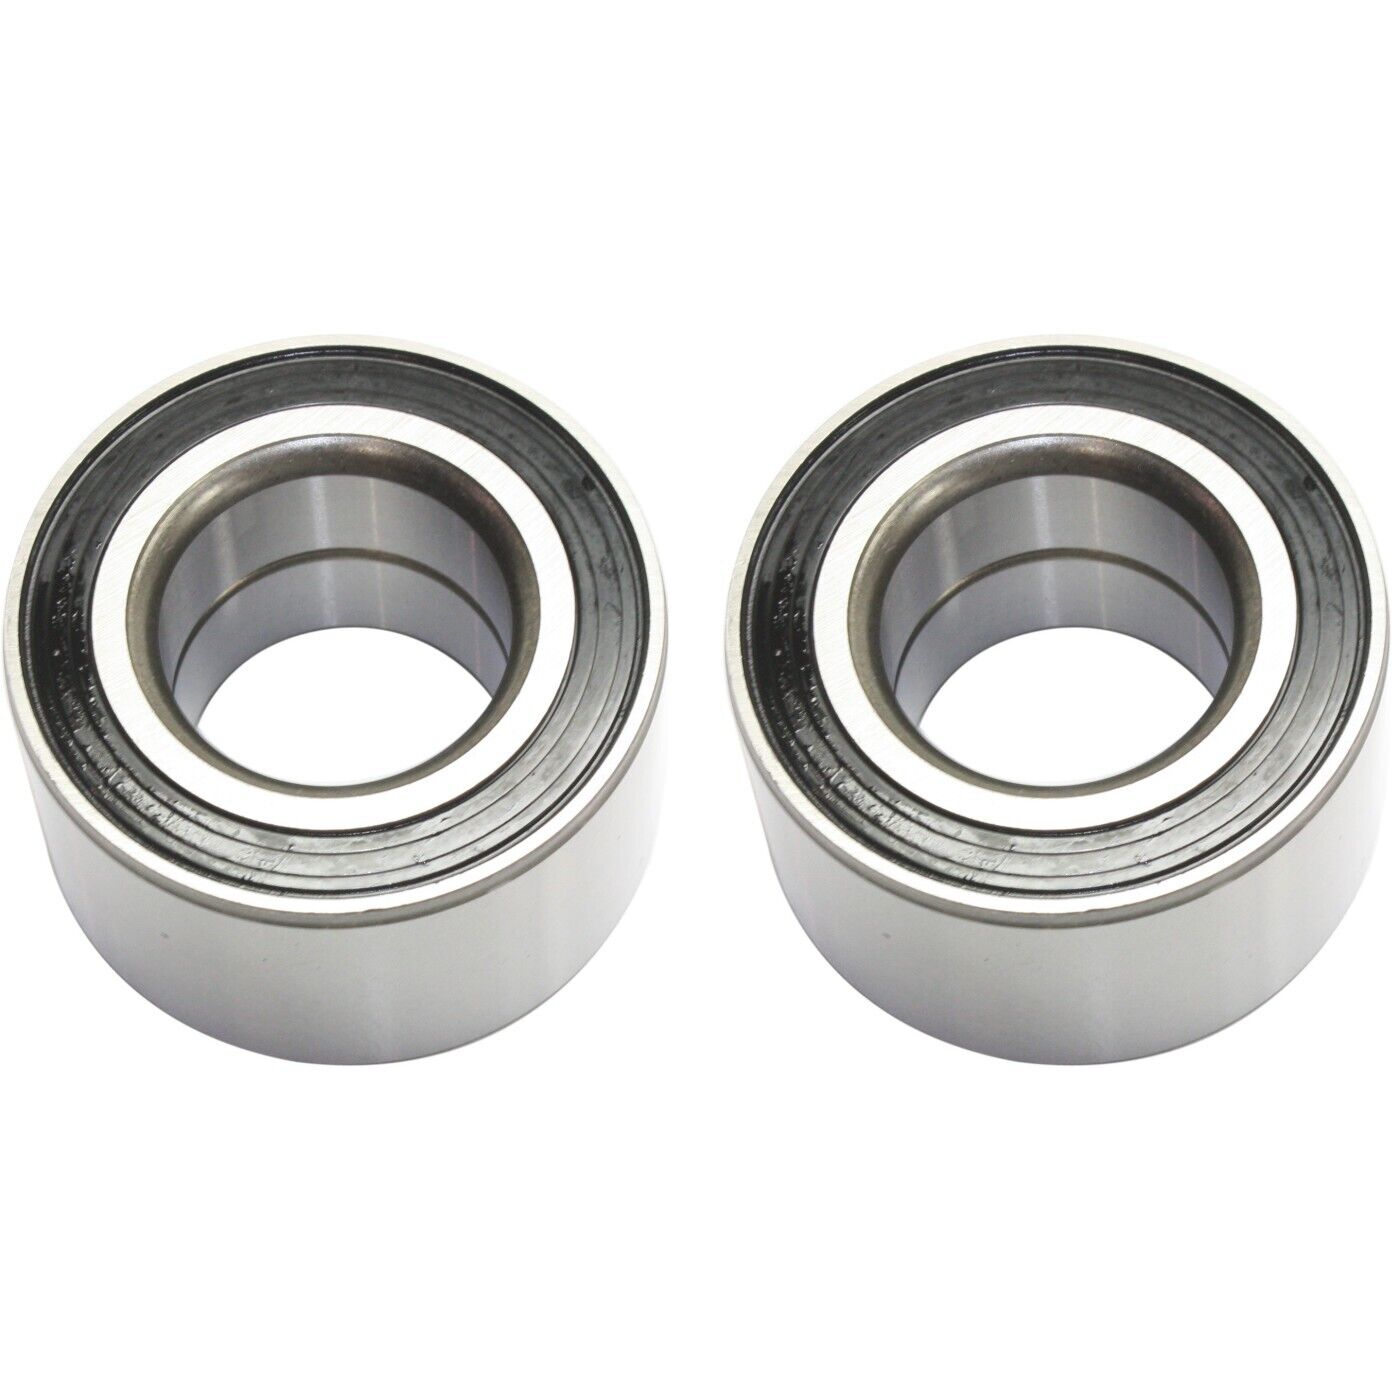 New Set of 2 Wheel Bearings Front or Rear Driver & Passenger Side VW Chevy Pair